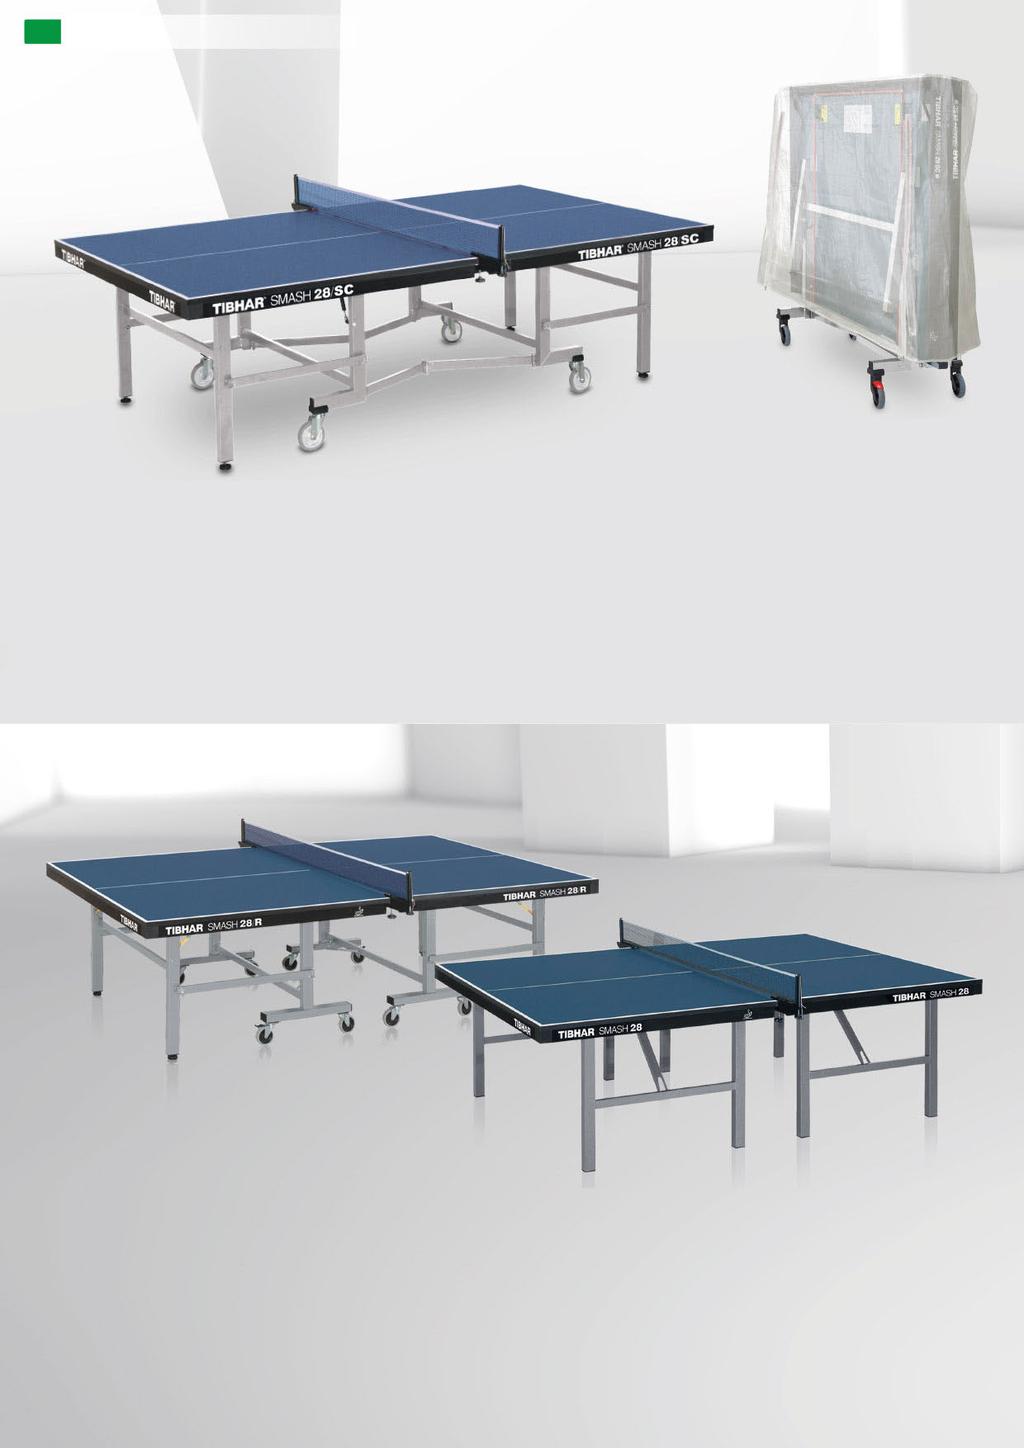 60 COMPETITION TABLES SMASH 28/SC Super Comptact table, can be opened by one person Both sides open simultaneously Pressurized gas cylinders counterbalance the weight of the surface Secured closing